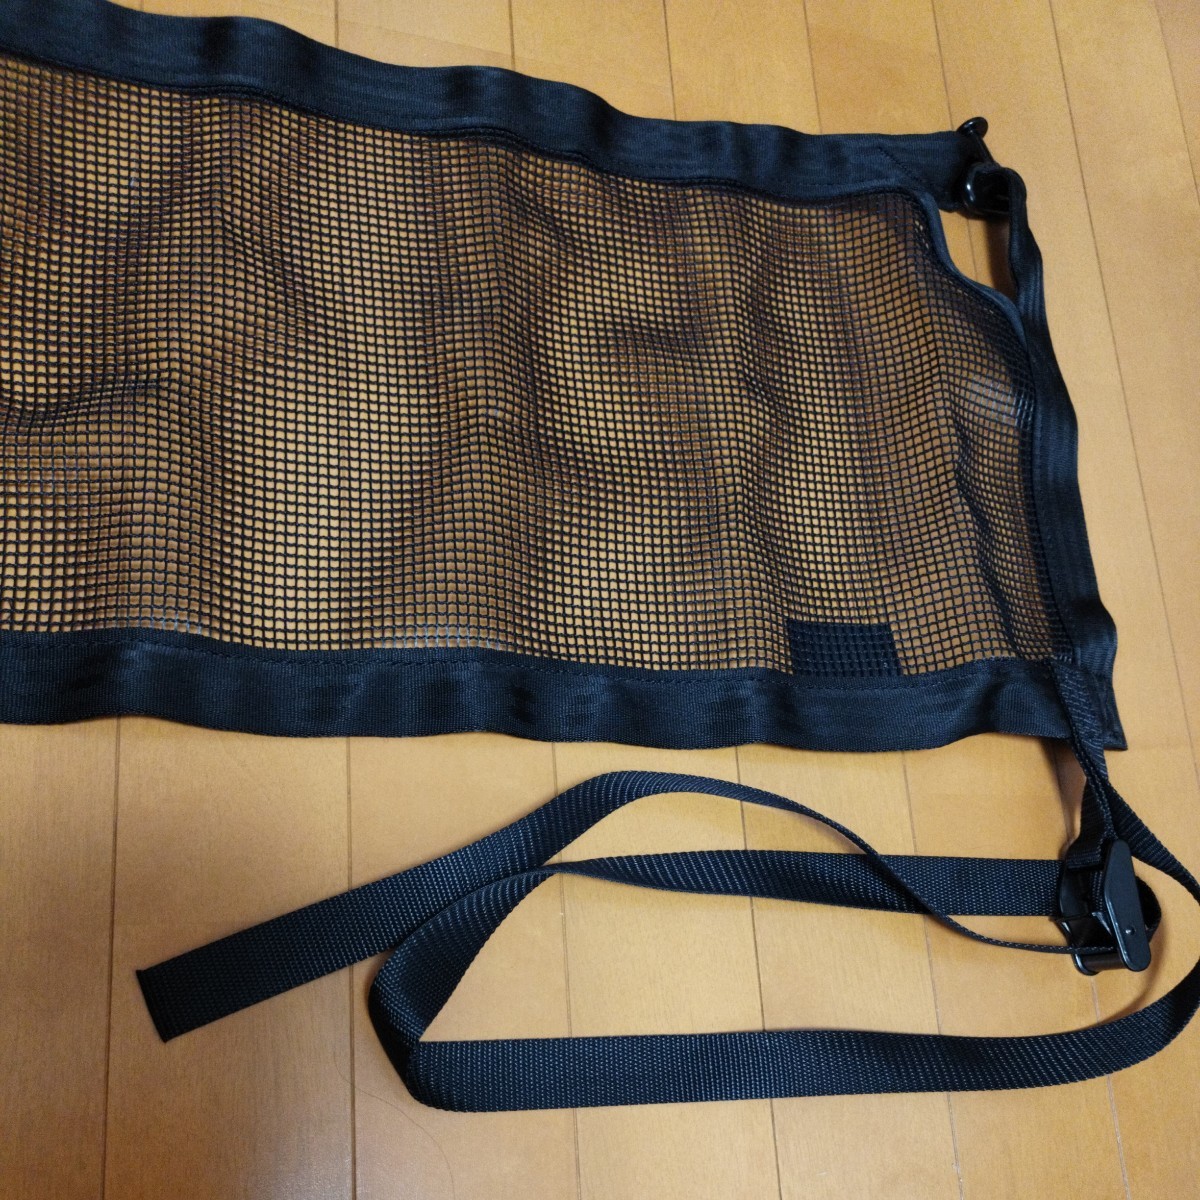  beautiful goods * Jaguar F-PACE Fpe chair genuine products luggage net trunk net cargo net HK8M-46406-AC exclusive use sack attaching 